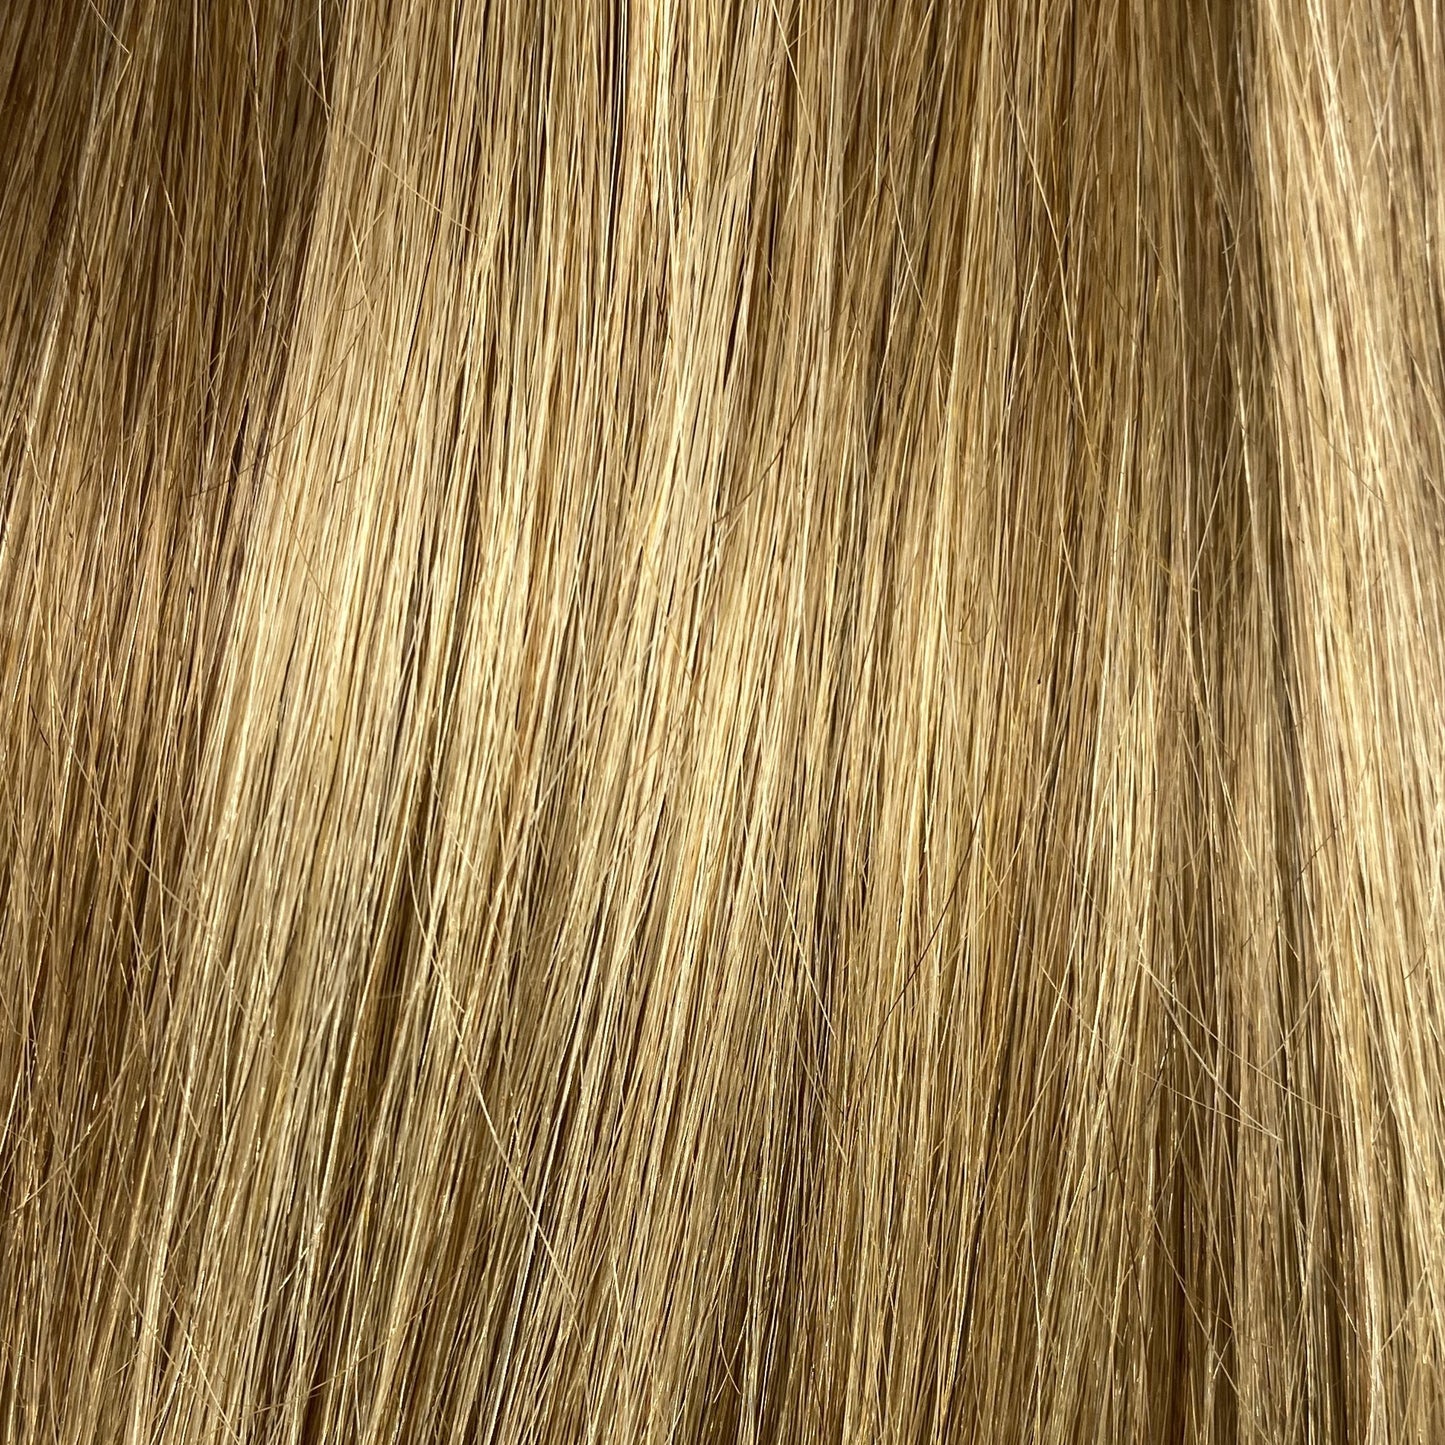 Velo #8/16 - 16 inches - Dark Blonde/Light Golden Blonde Velo DR Hair Products Co 